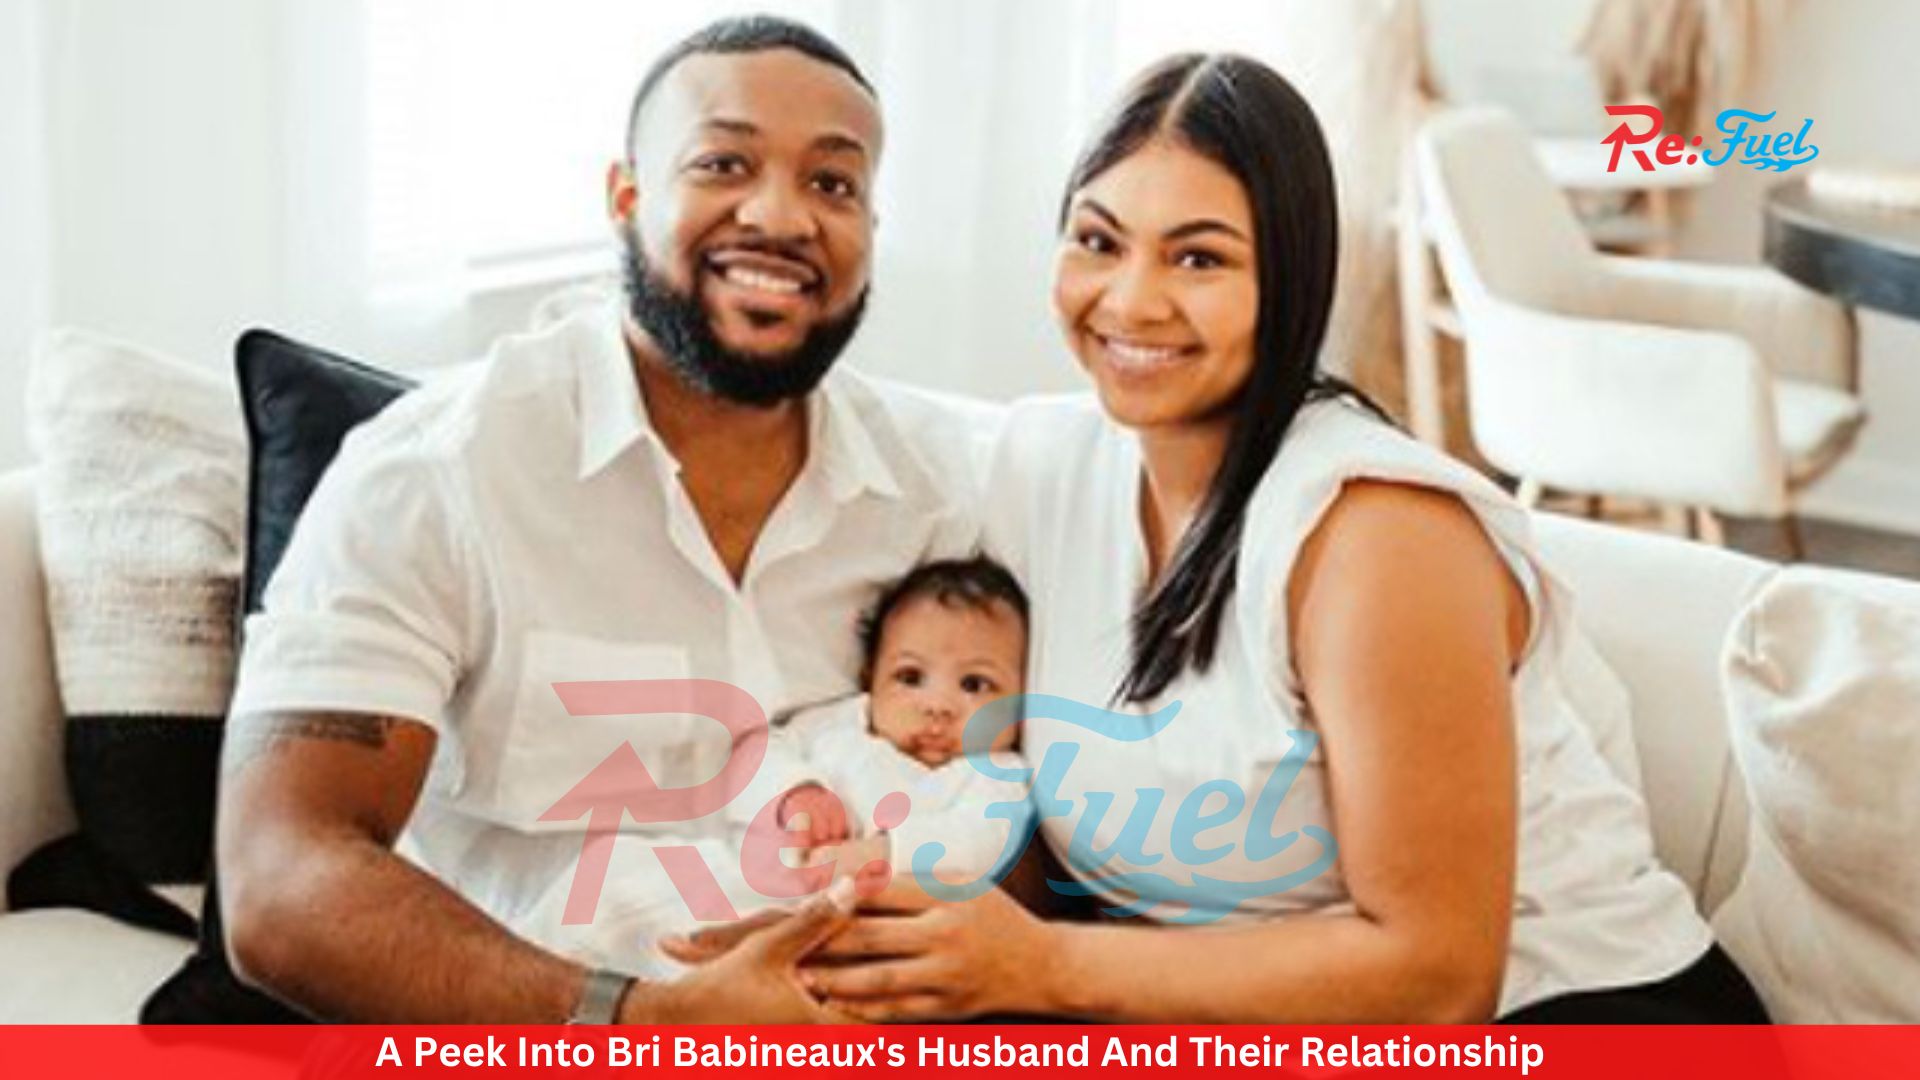 A Peek Into Bri Babineaux's Husband And Their Relationship